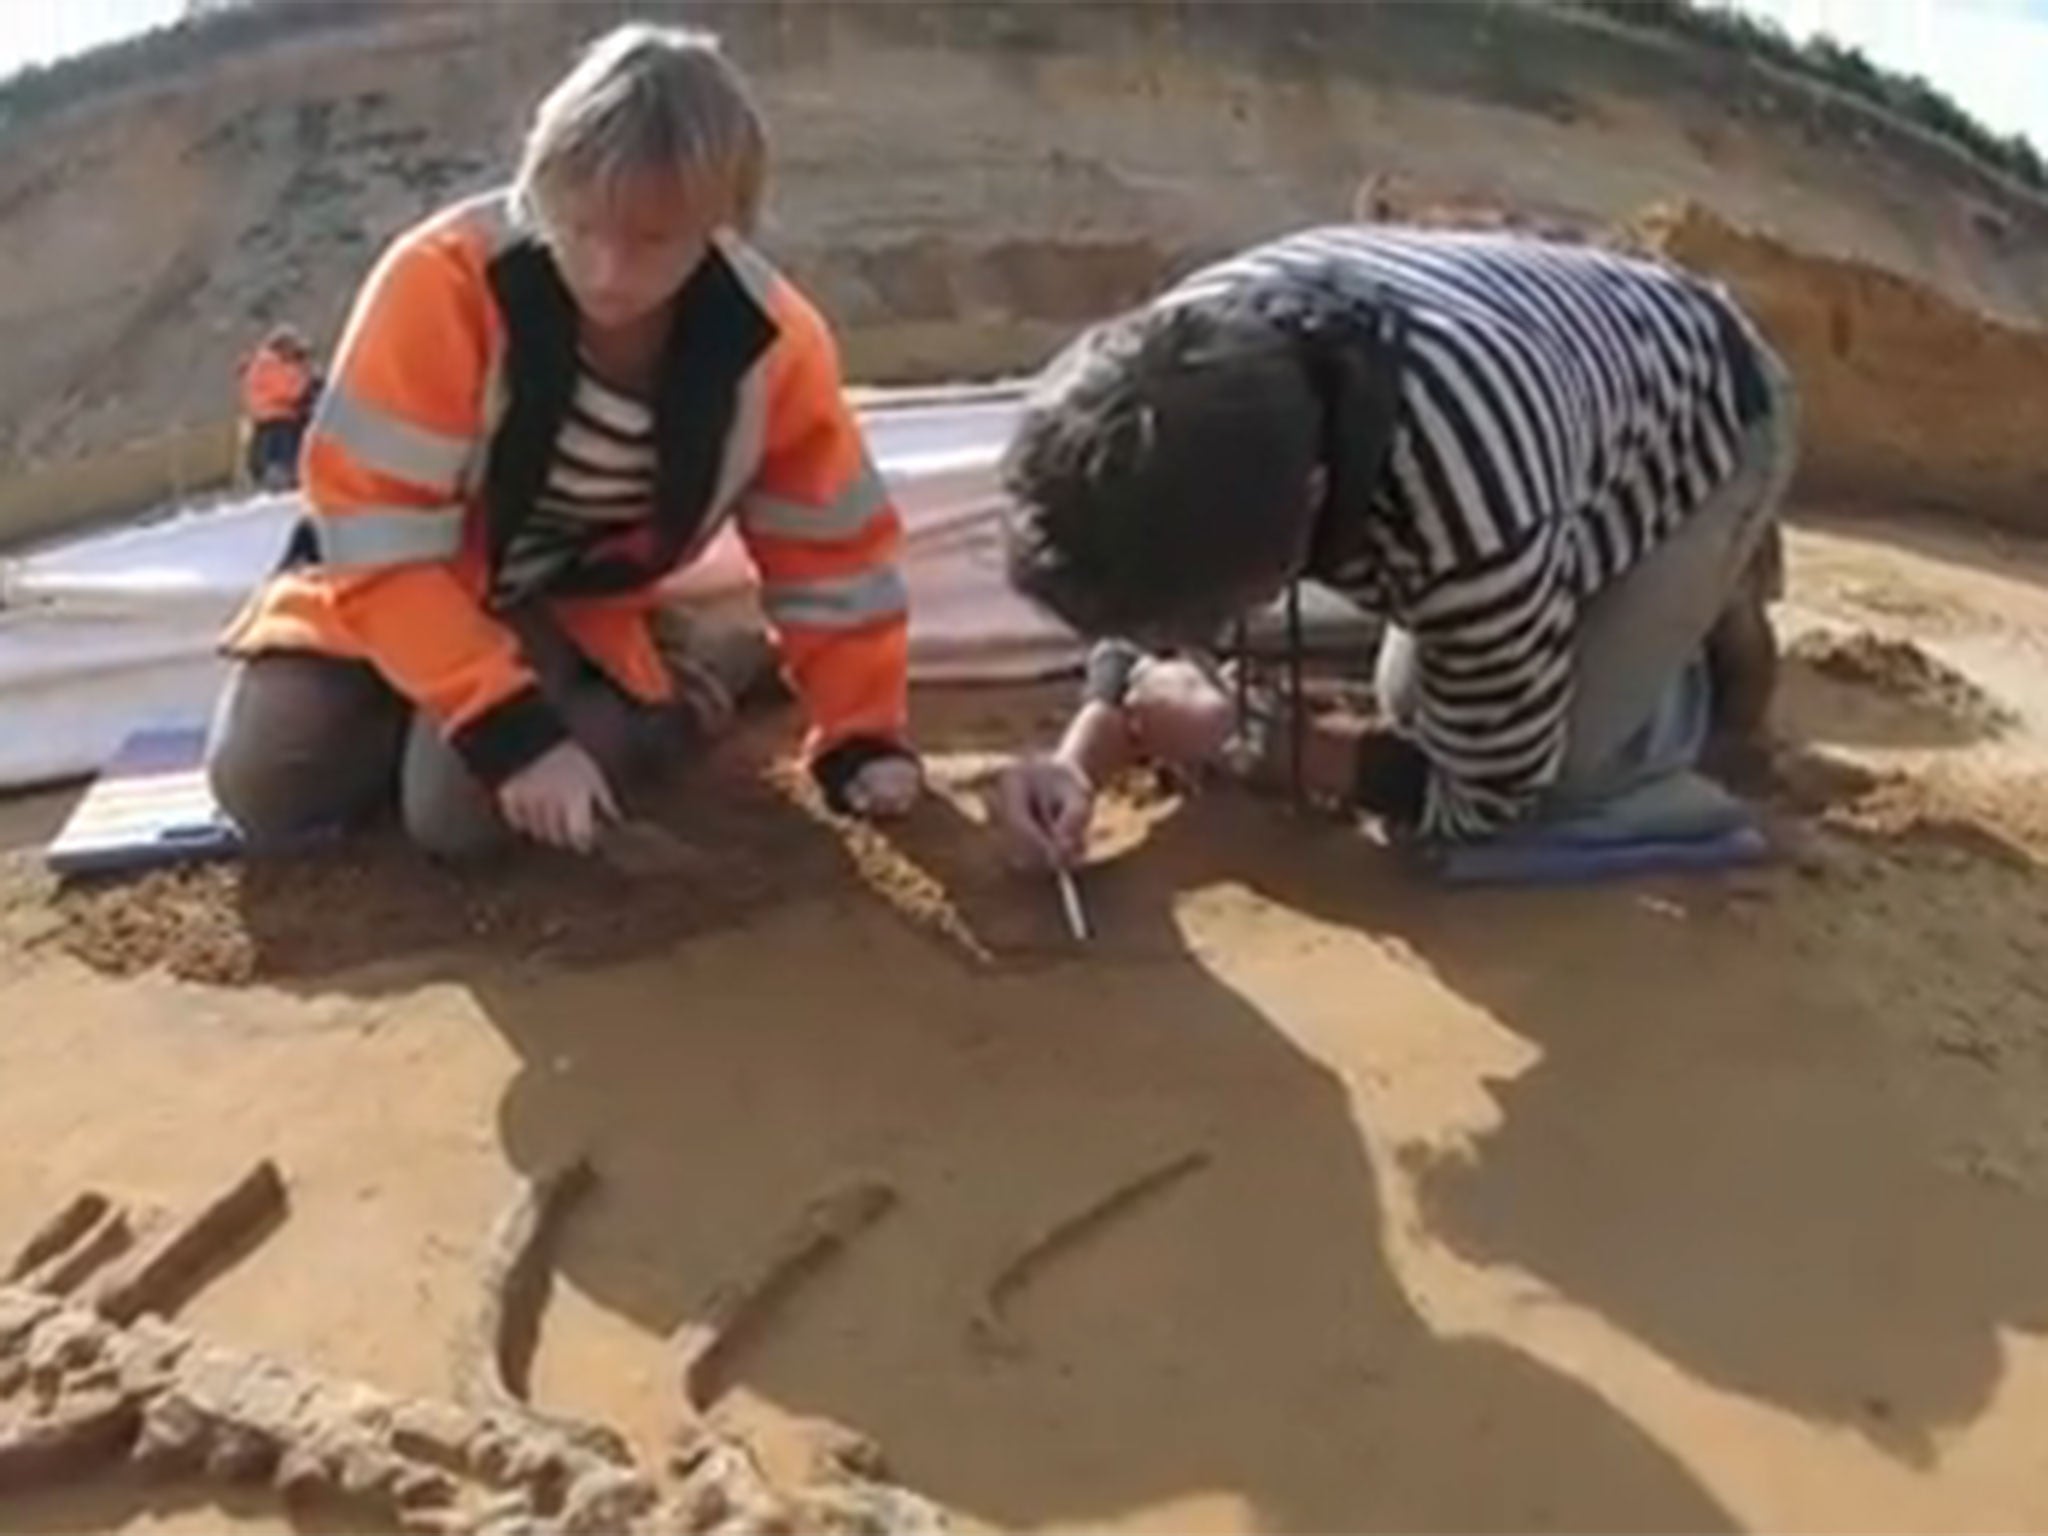 Archaeologists have found 200,000-year-old human bones found in France